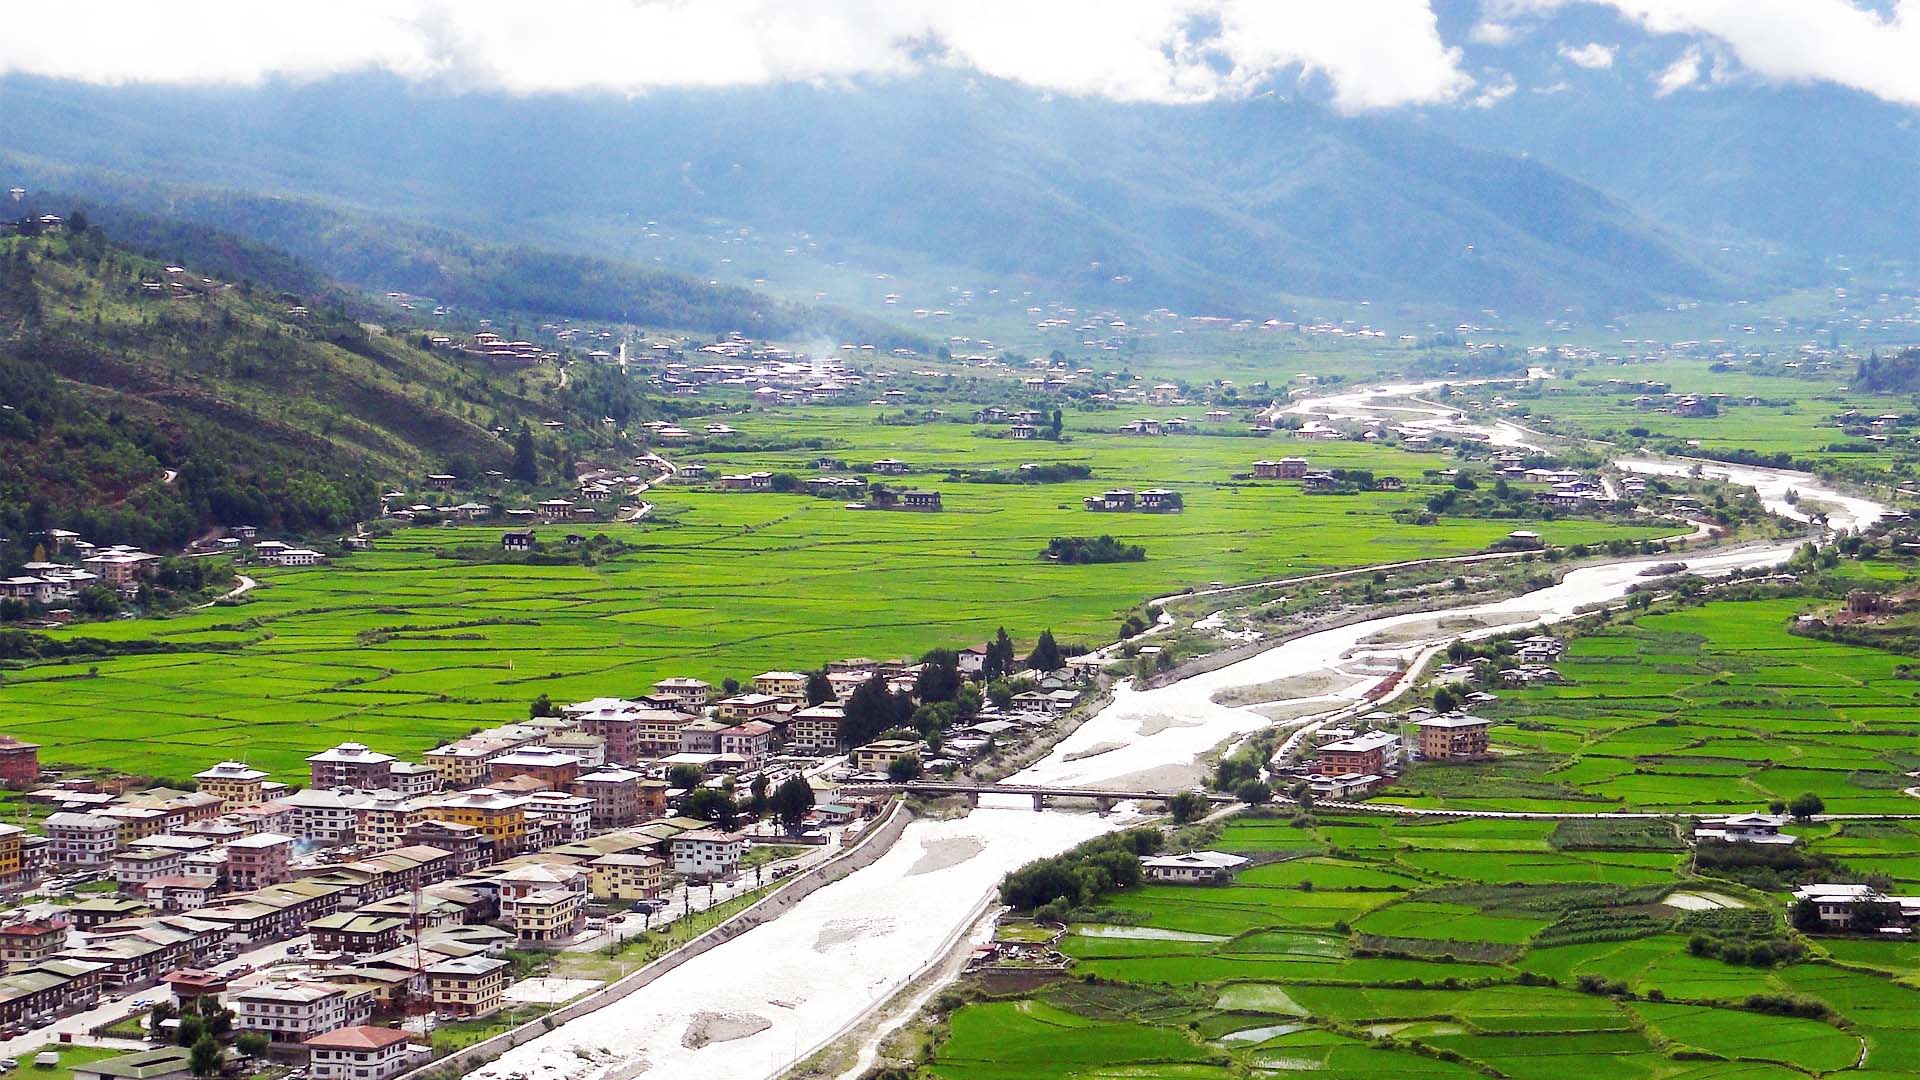 Weather and climate in Bhutan